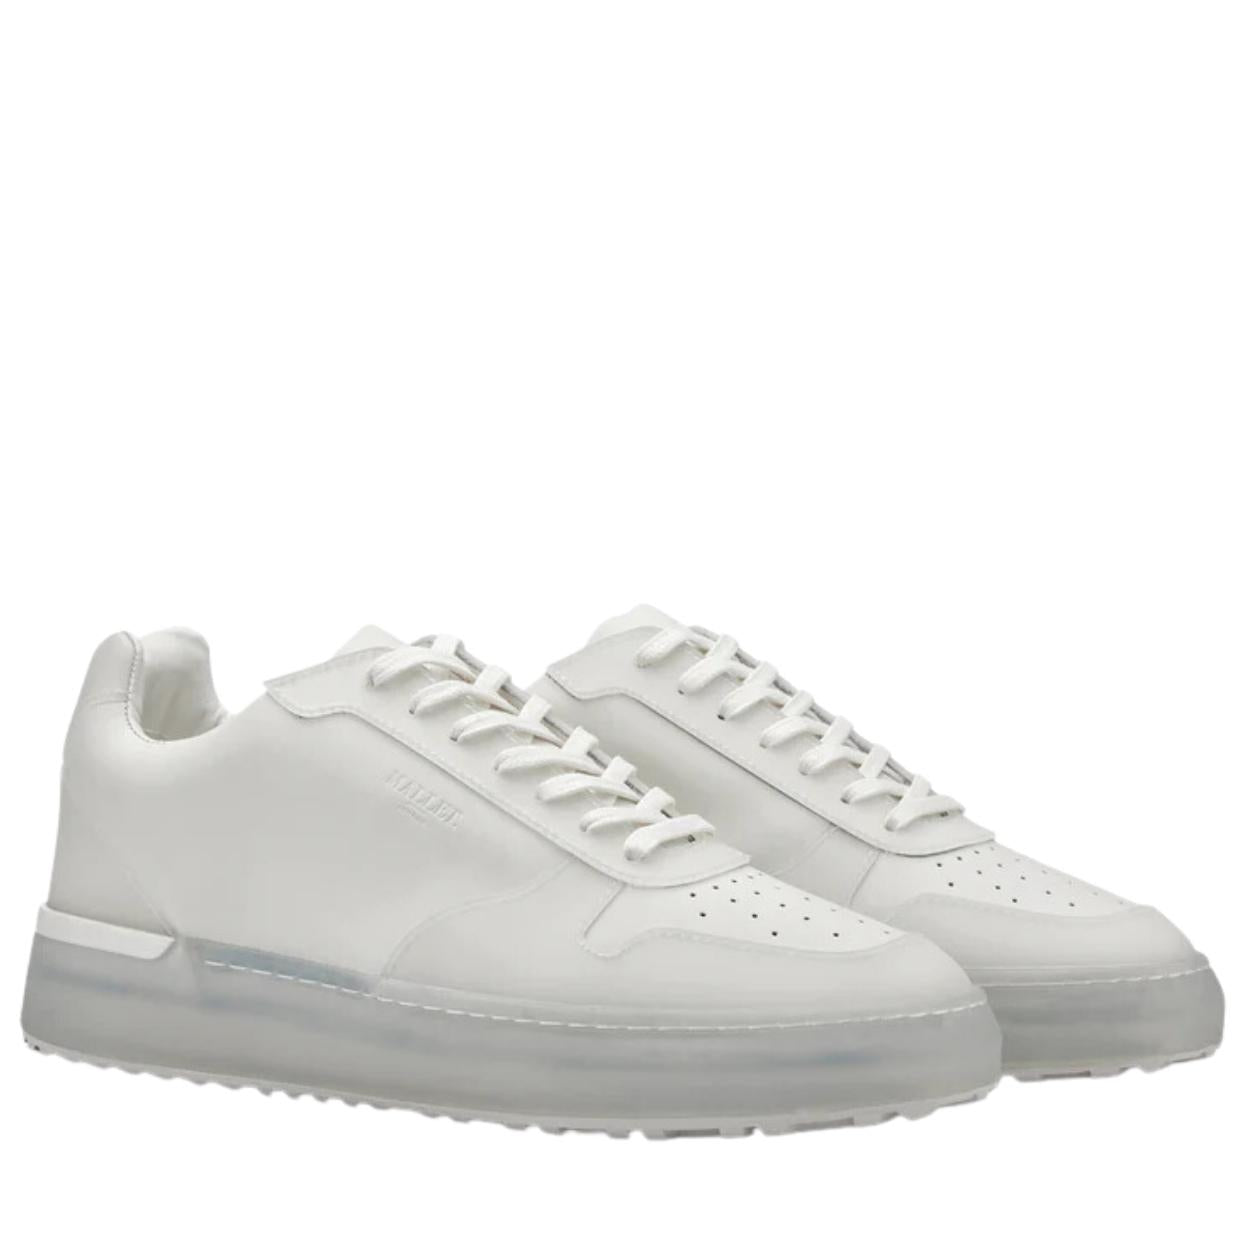 Mallet Hoxton 2.0 Clear White Trainers